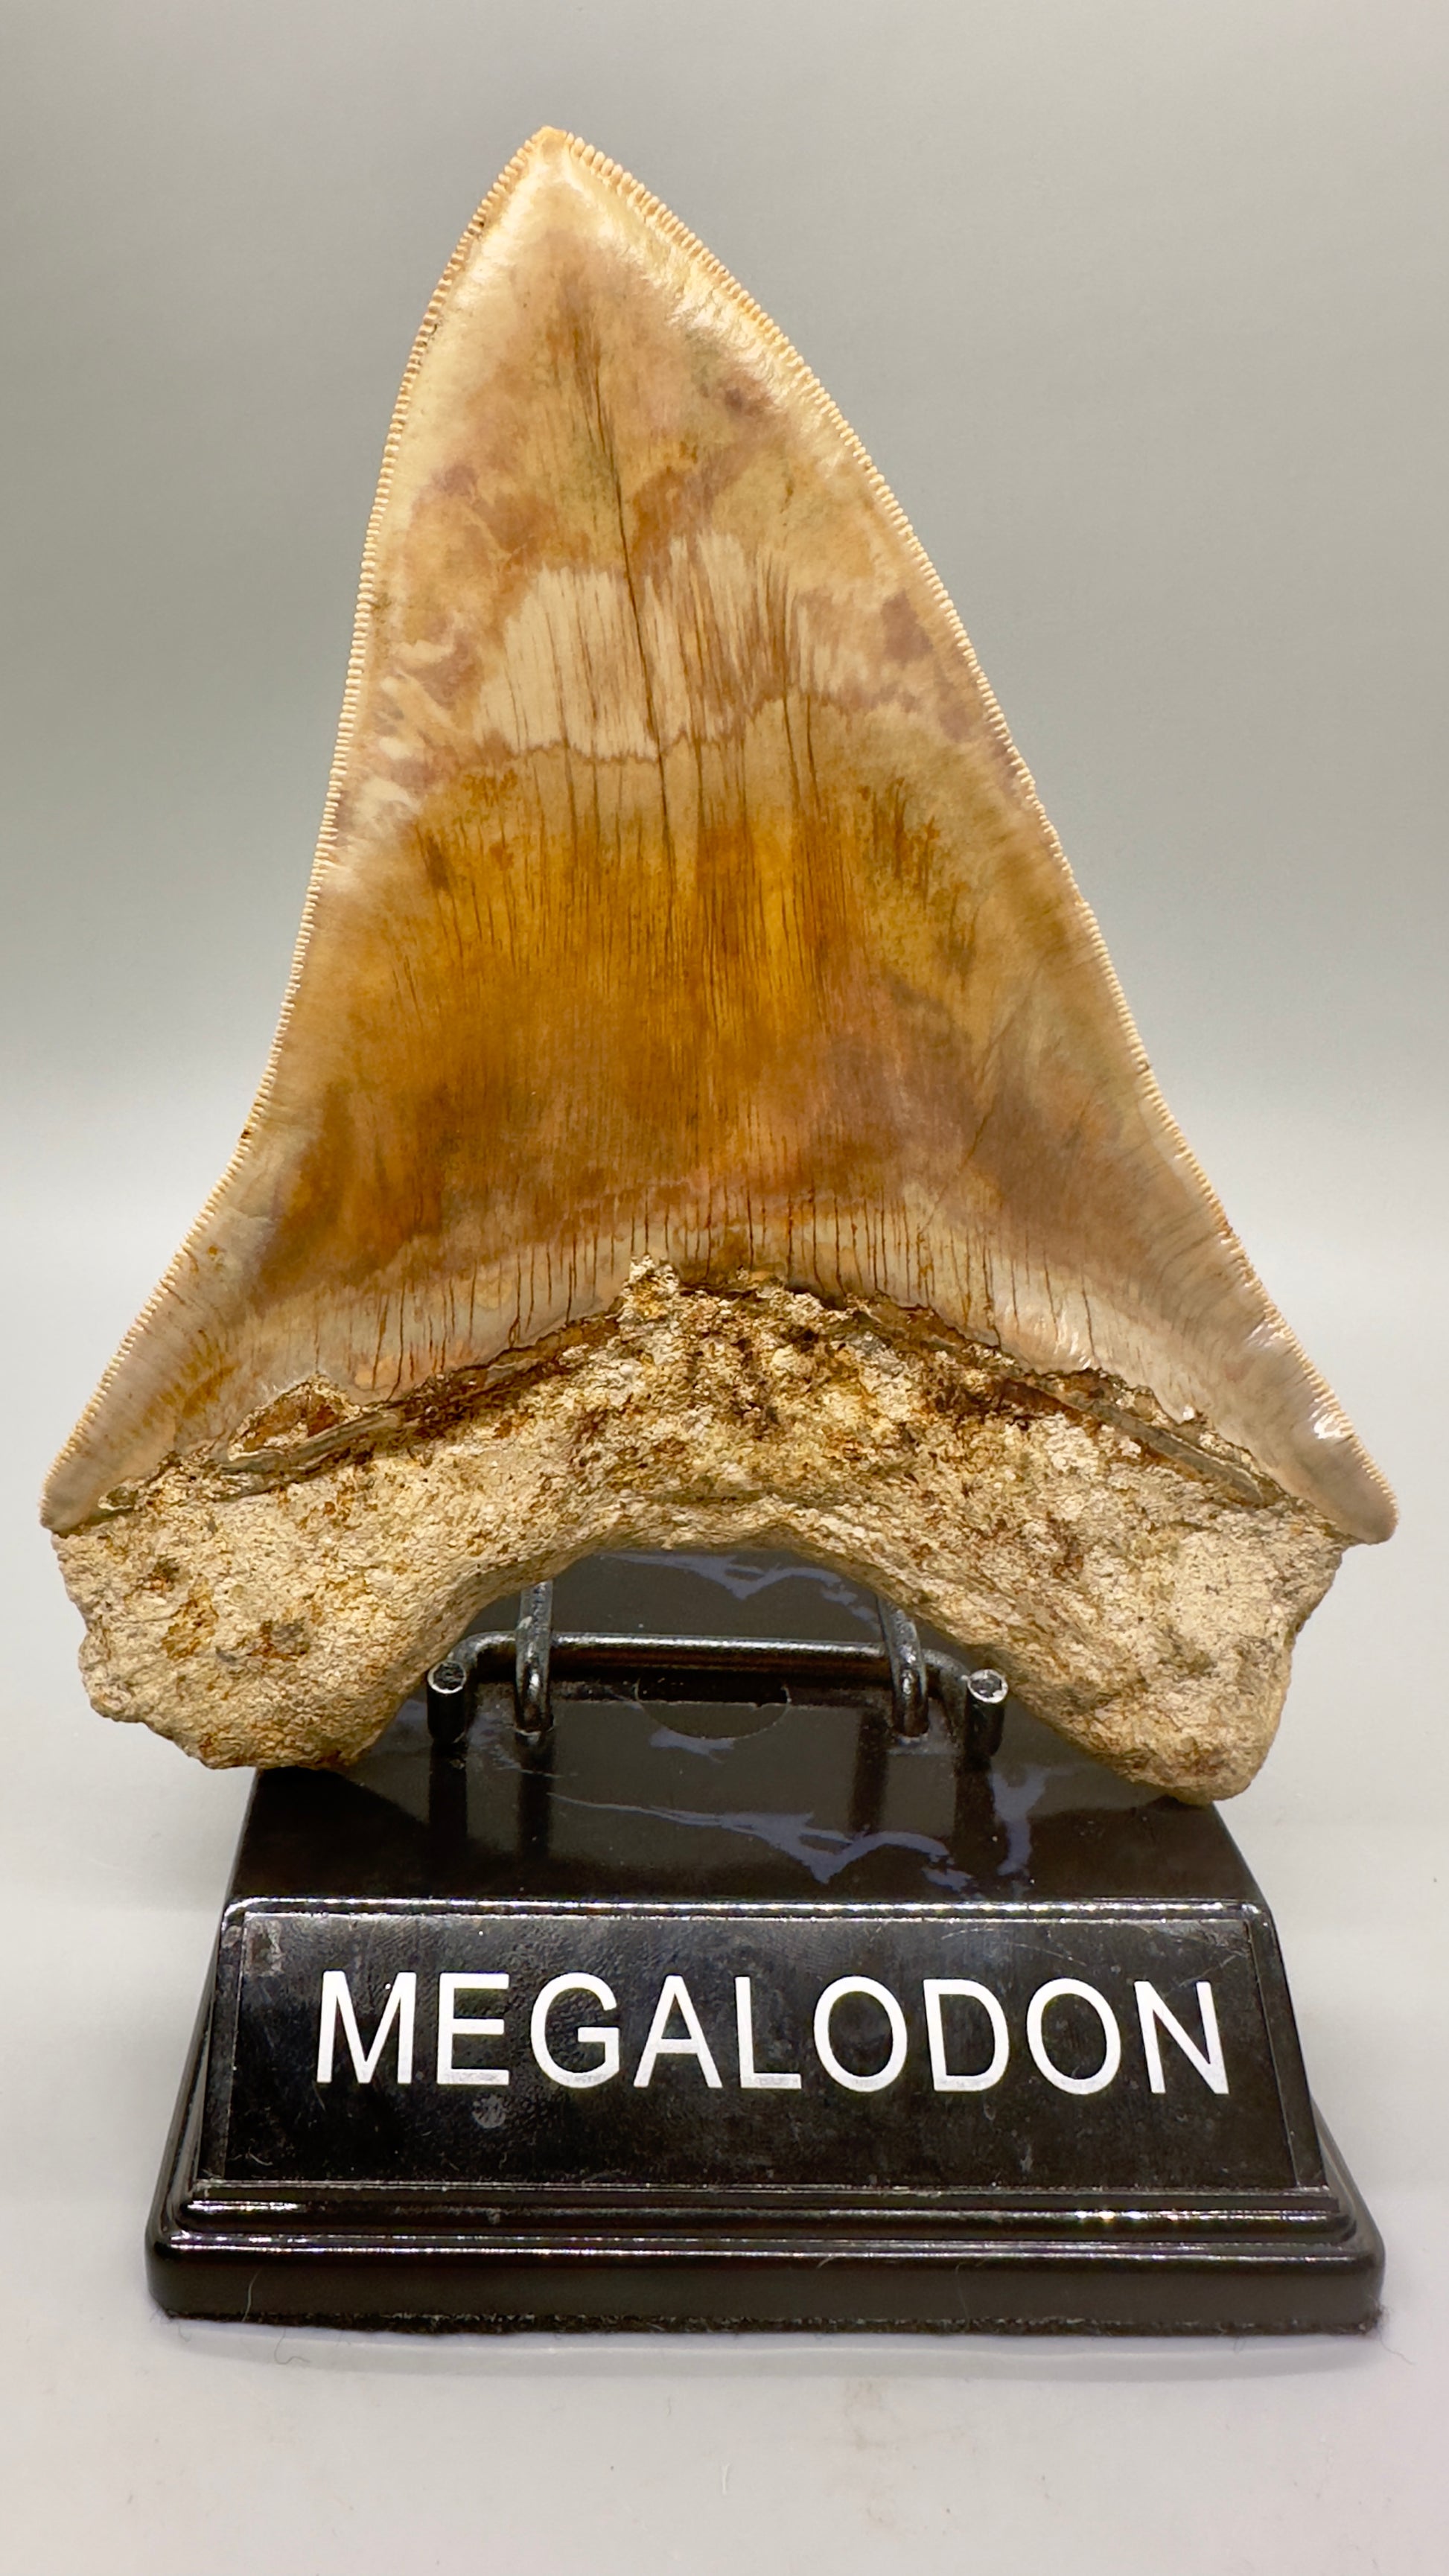 EXTRA LARGE 6.09" Fossil Monster Megalodon Tooth from Indonesia - Collector Quality CM4635 - Back on stand